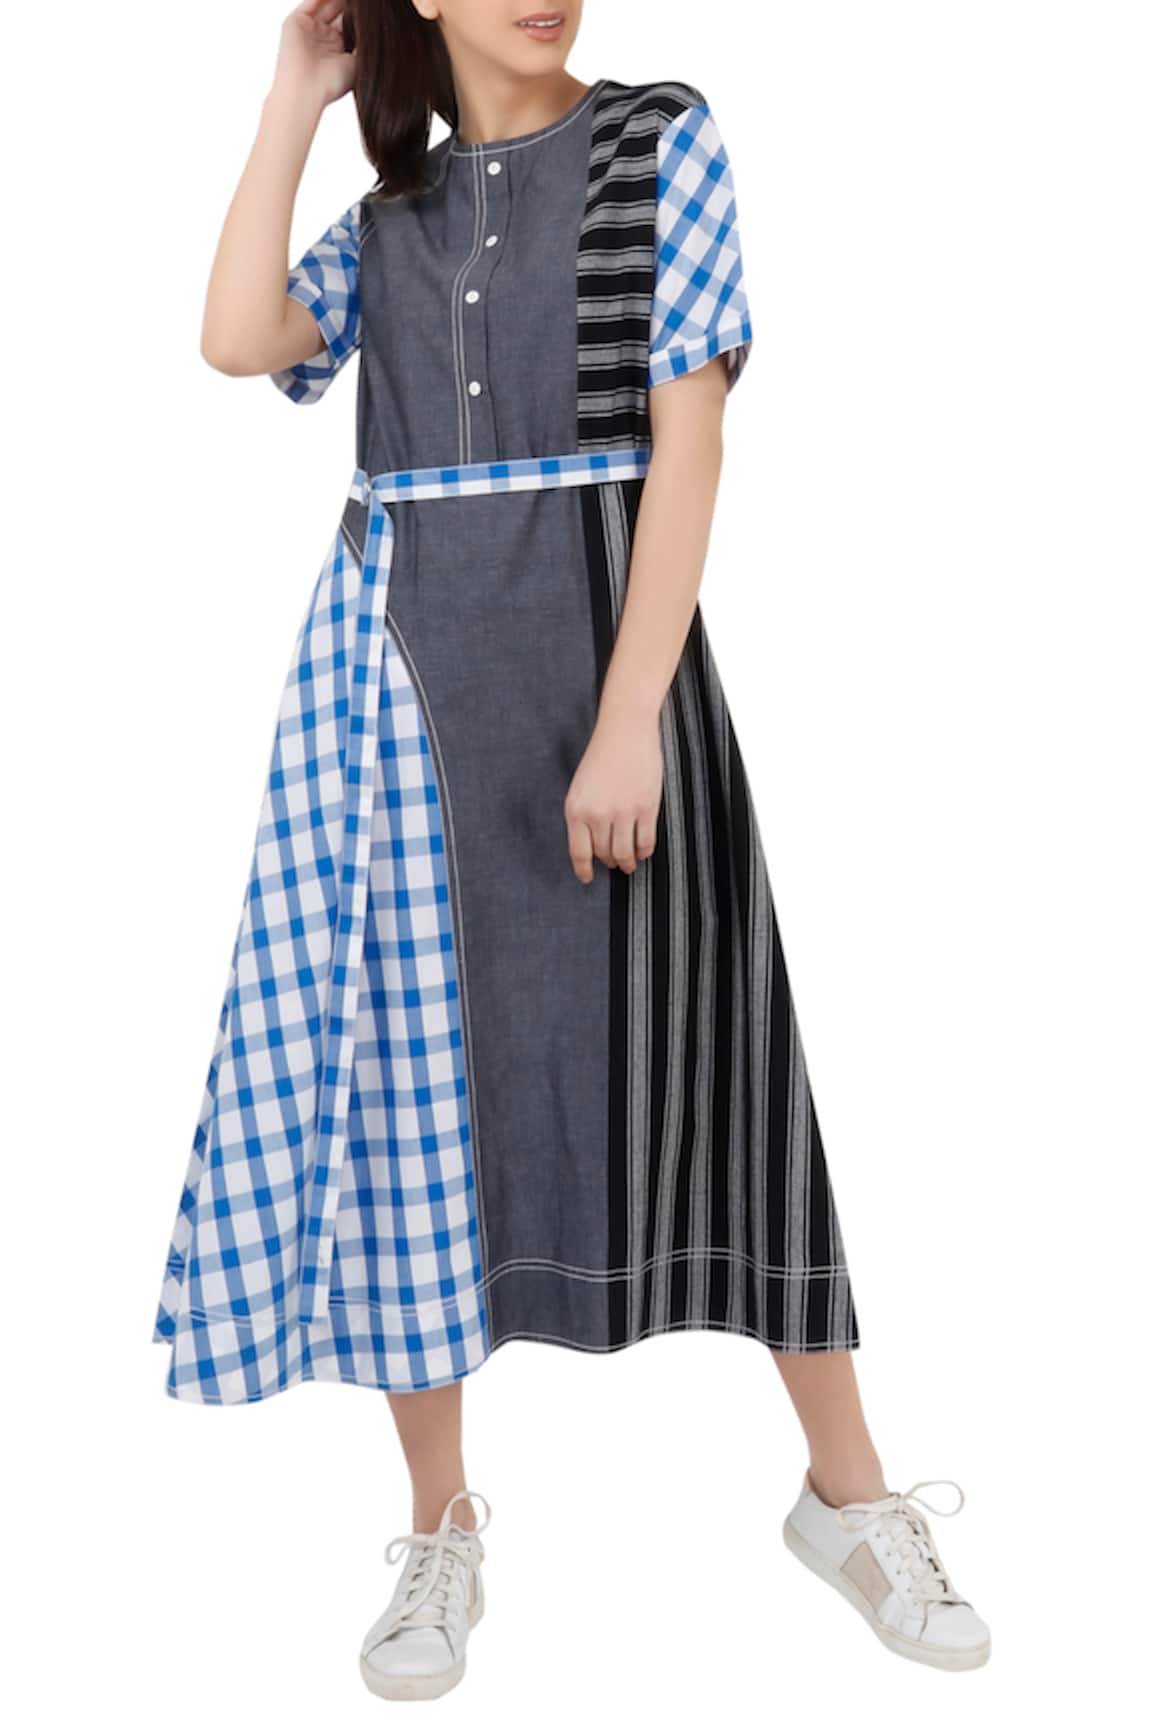 S & V Designs Checkered Striped Dress with Belt